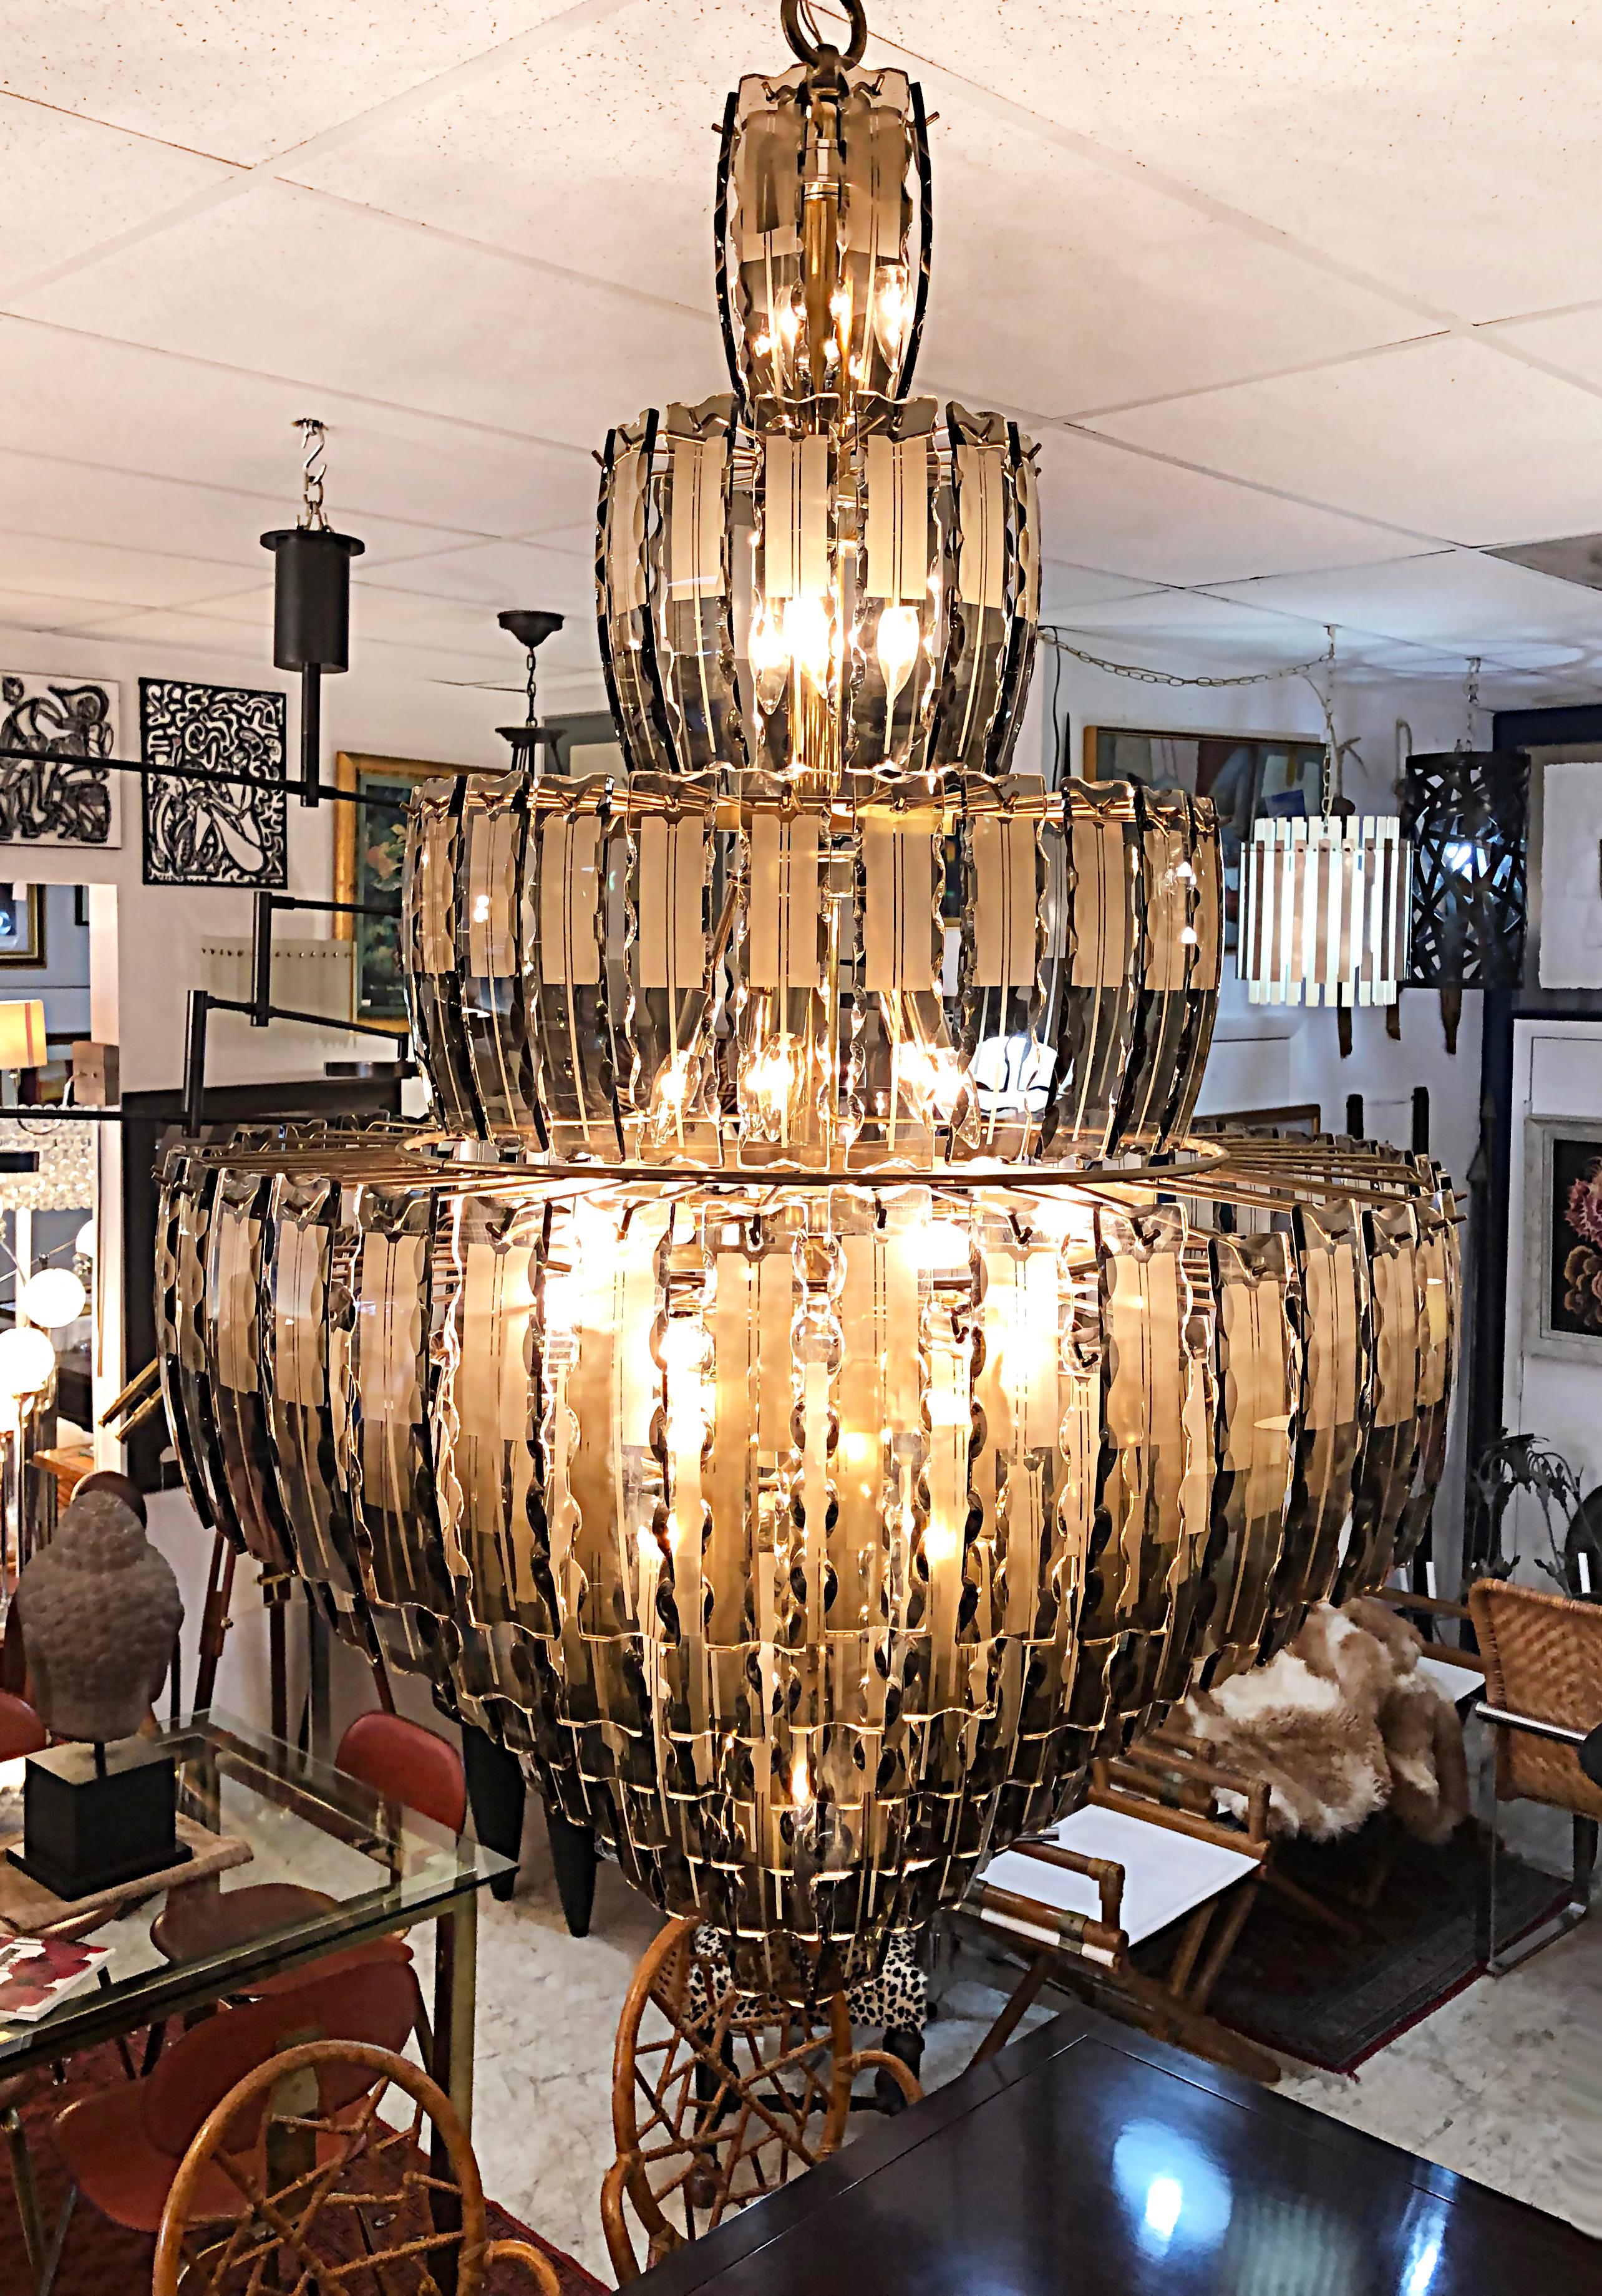 Monumental Mid-Century Modern tiered chandelier with amber tinted glass crystals.

Offered for sale is a monumental Mid-Century Modern tiered chandelier with amber-tinted glass crystals. The chandelier will drop over 5 feet and can be hung with a